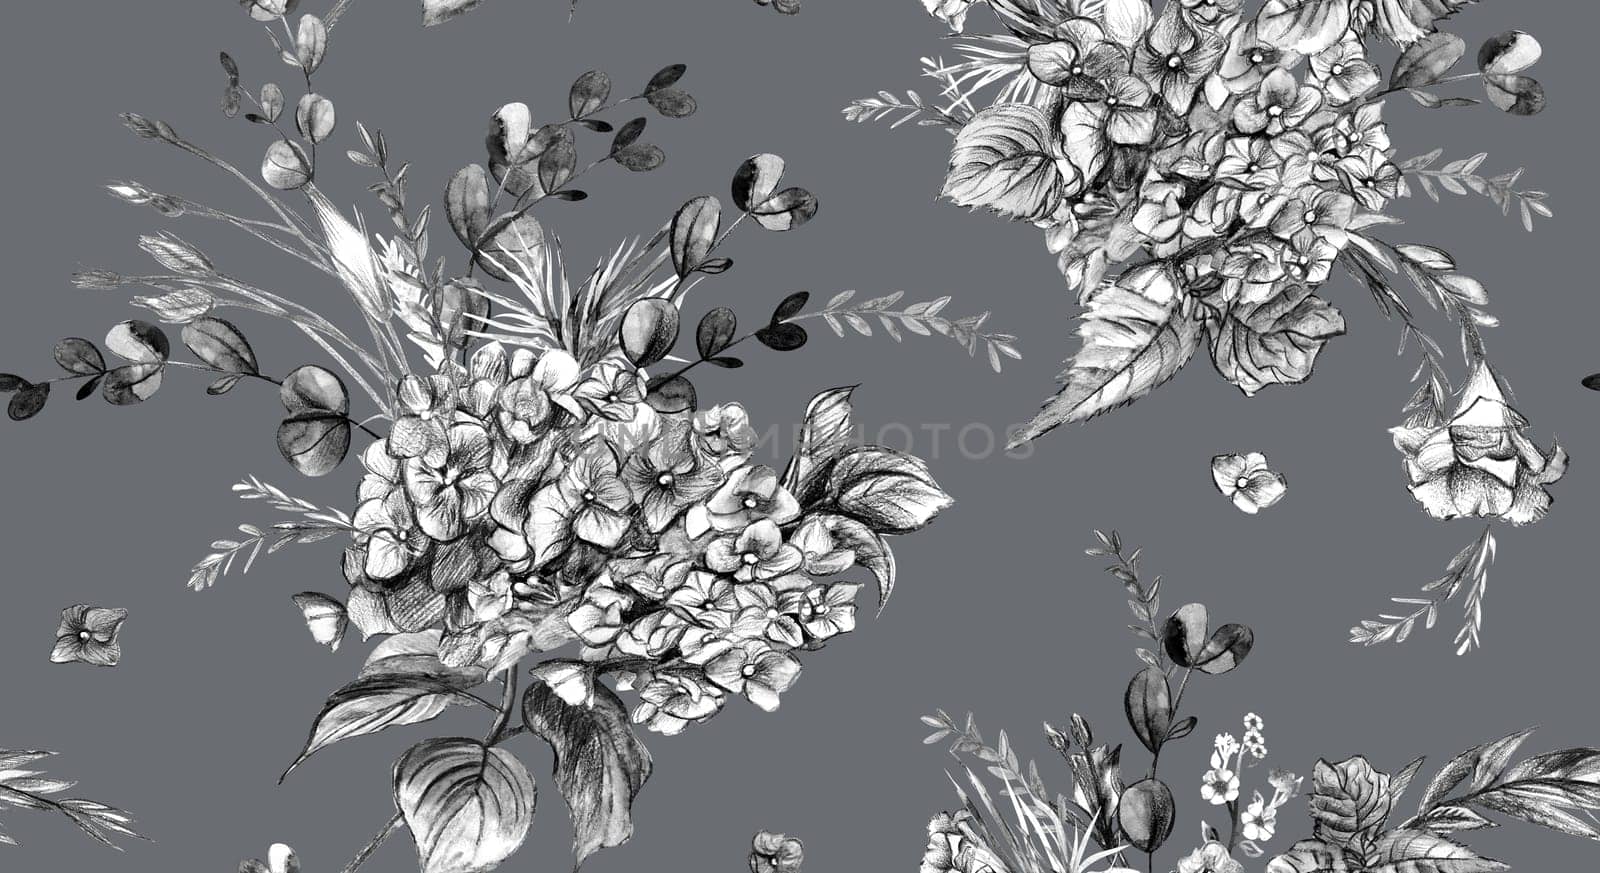 botanical pattern with black and white hydrangea flowers drawn in watercolor and pencil on a gray background for textiles and surface design